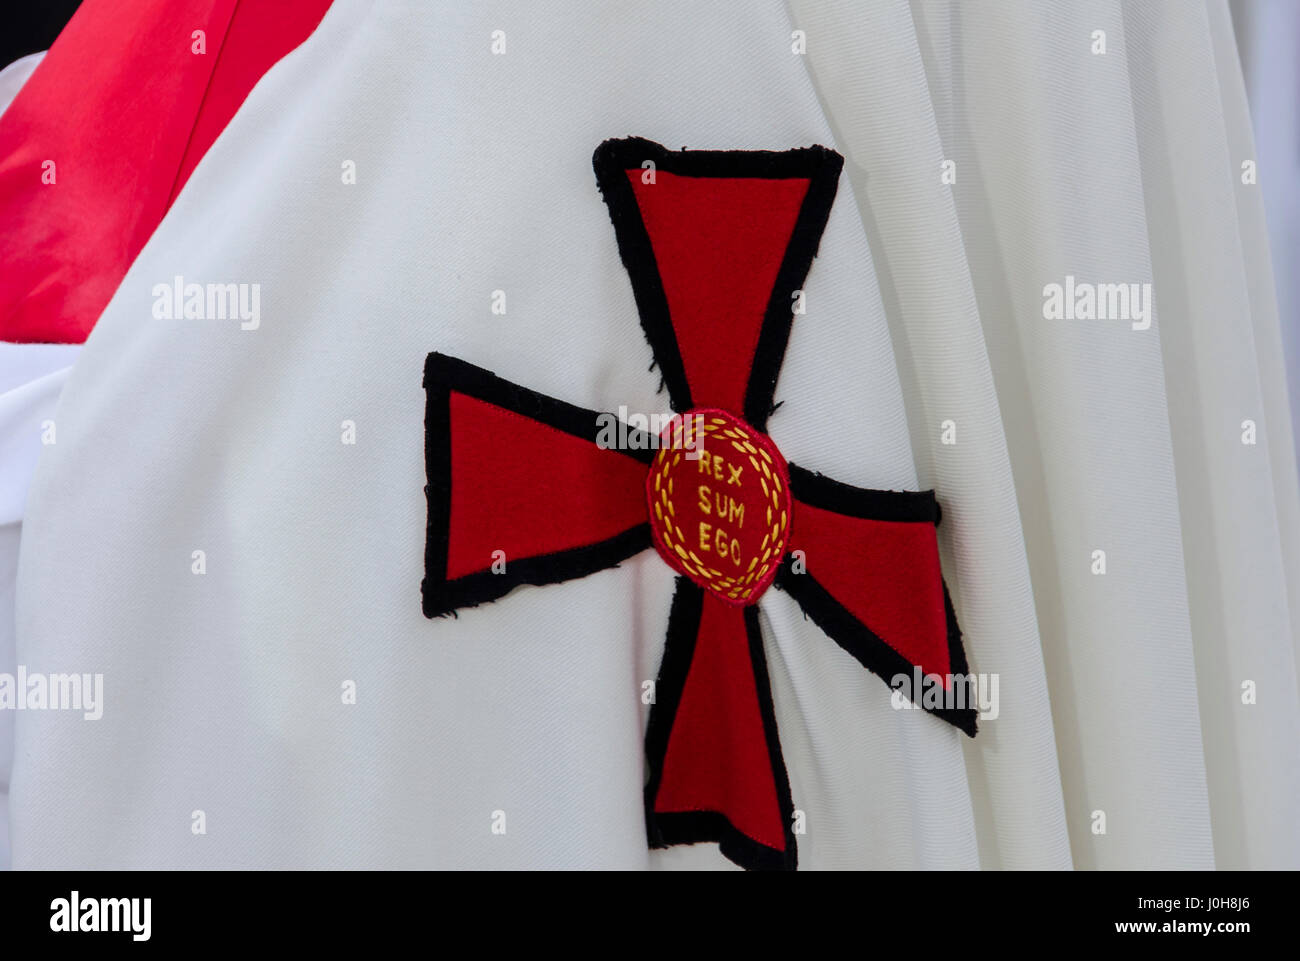 Madrid, Spain, 13th April 2017. Holy Thursday previous procession Jesus el Divino Cautivo with a red cross in Madrid, Spain. Credit: Enrique Davó/Alamy Live News. Stock Photo